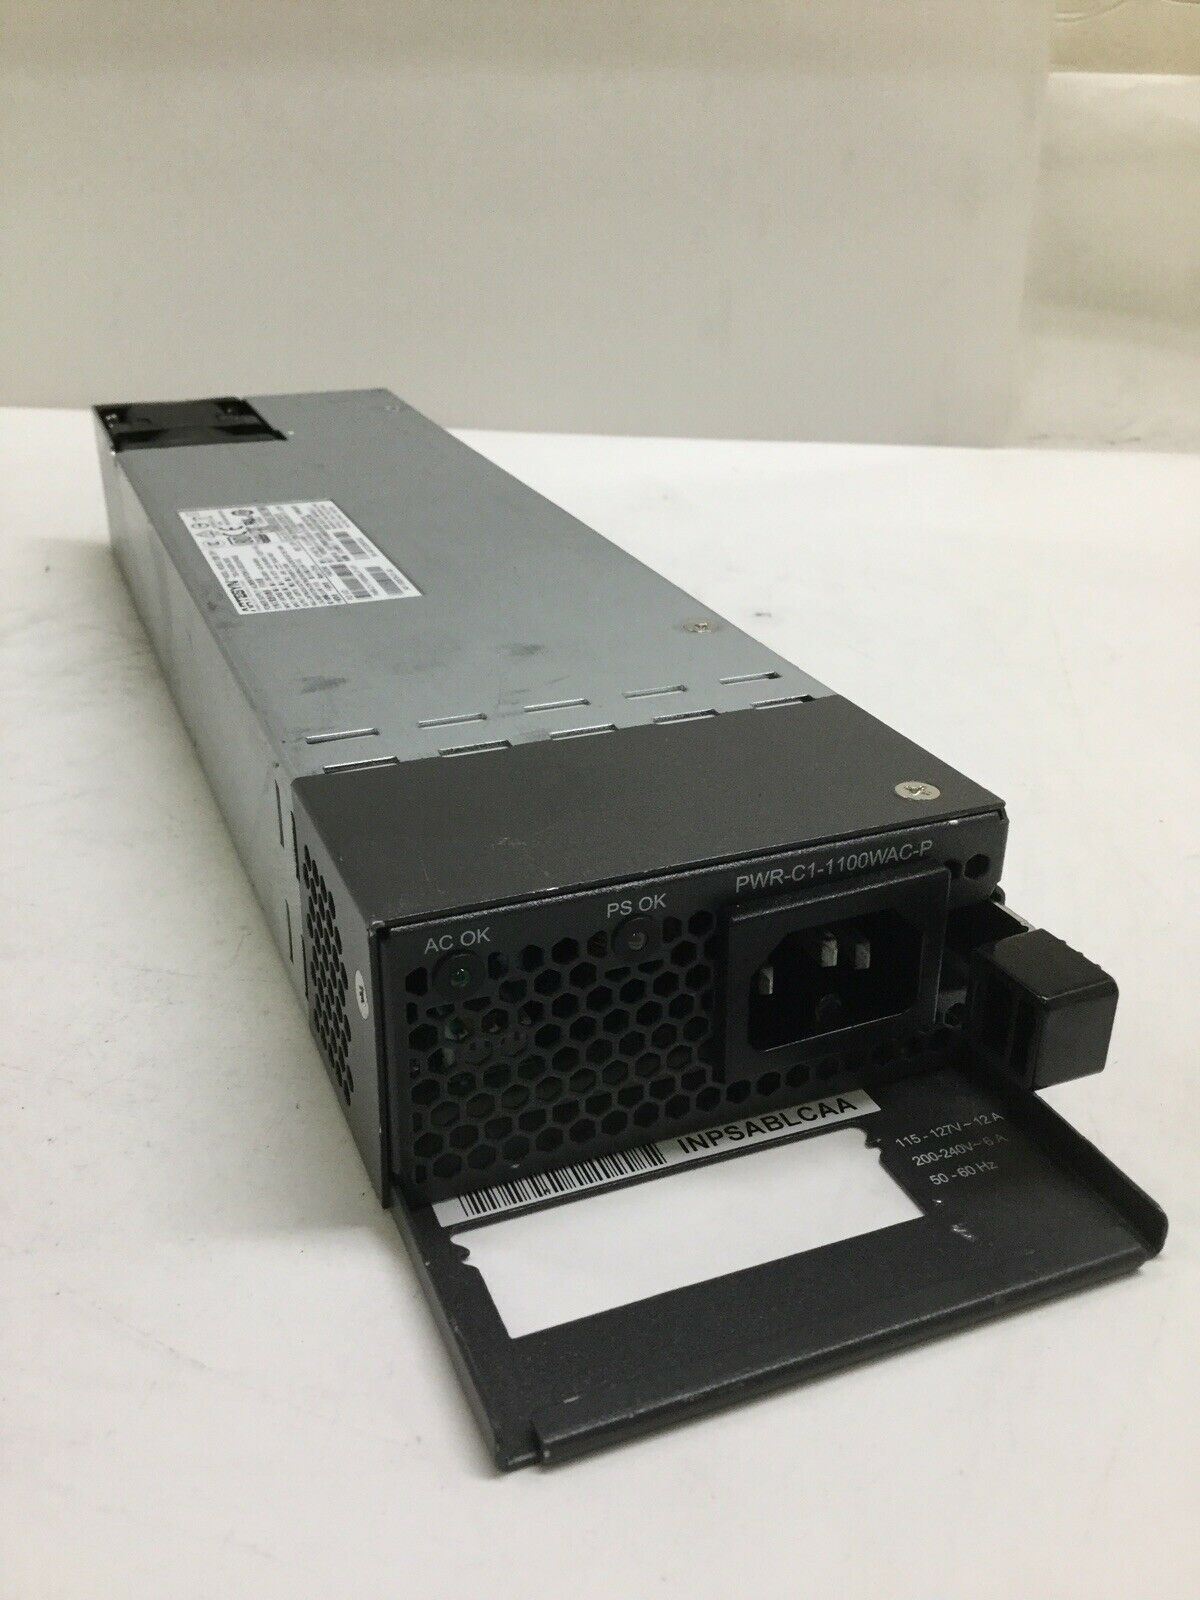 Cisco PWR-C1-1100WAC-P 1100W AC Power Supply for 3850 C9300 Series Switches